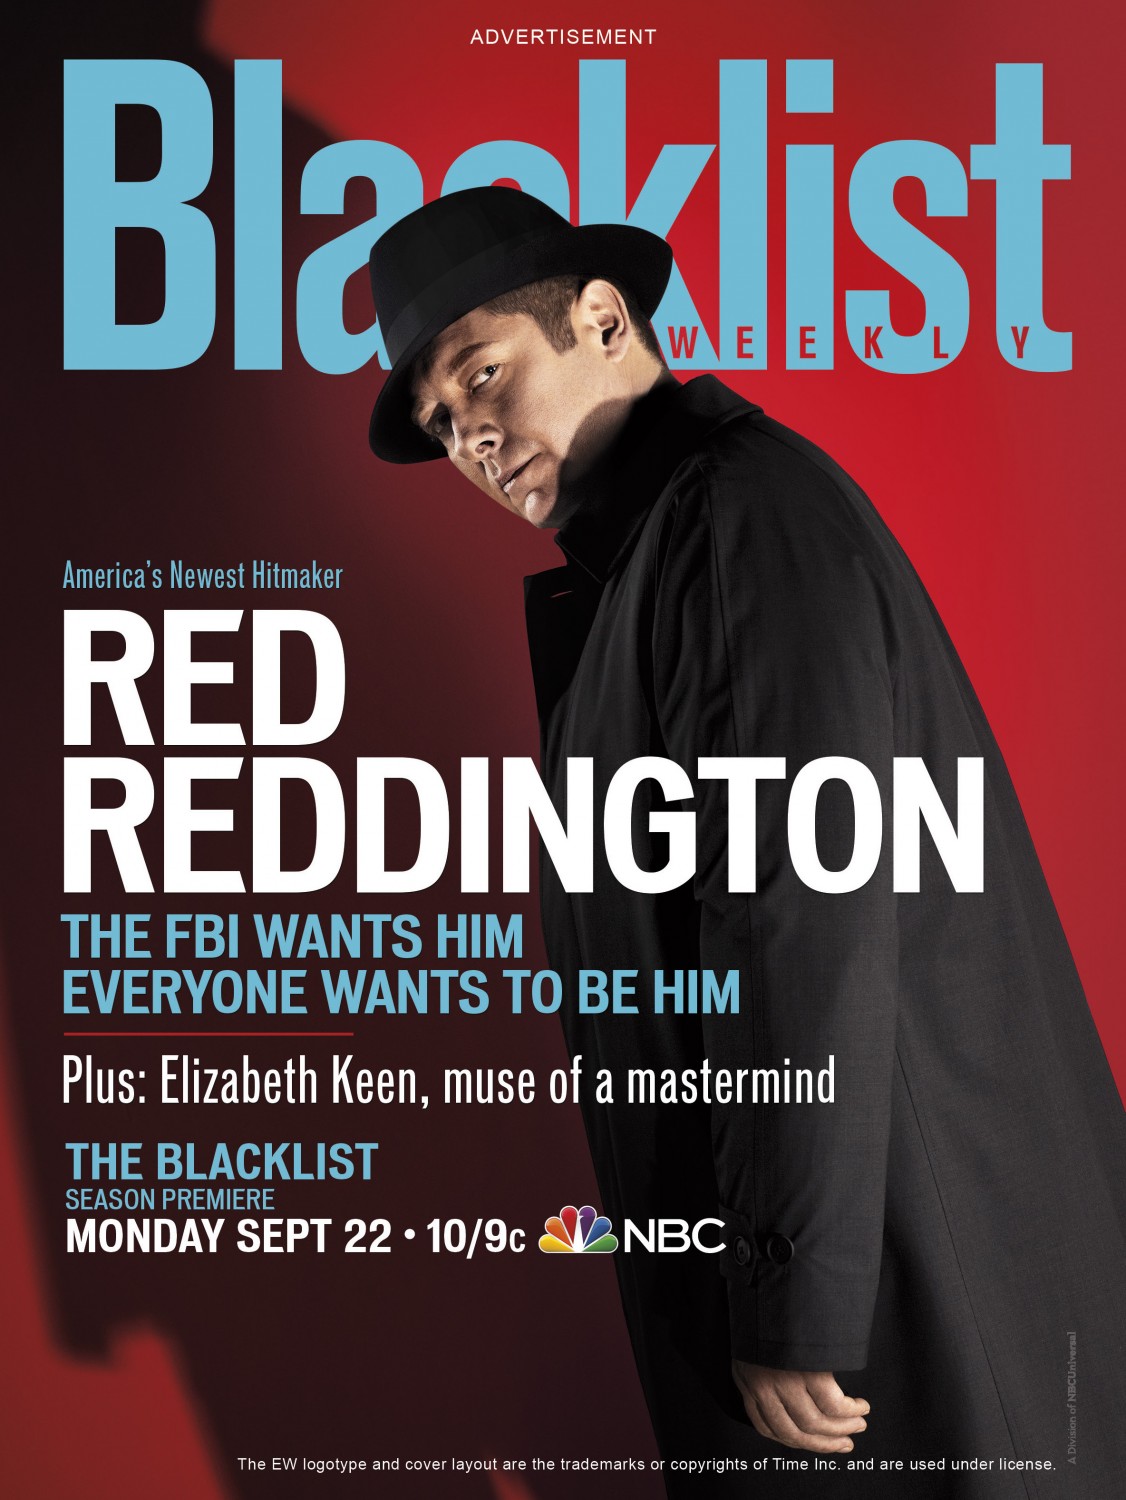 Extra Large TV Poster Image for The Blacklist (#5 of 26)